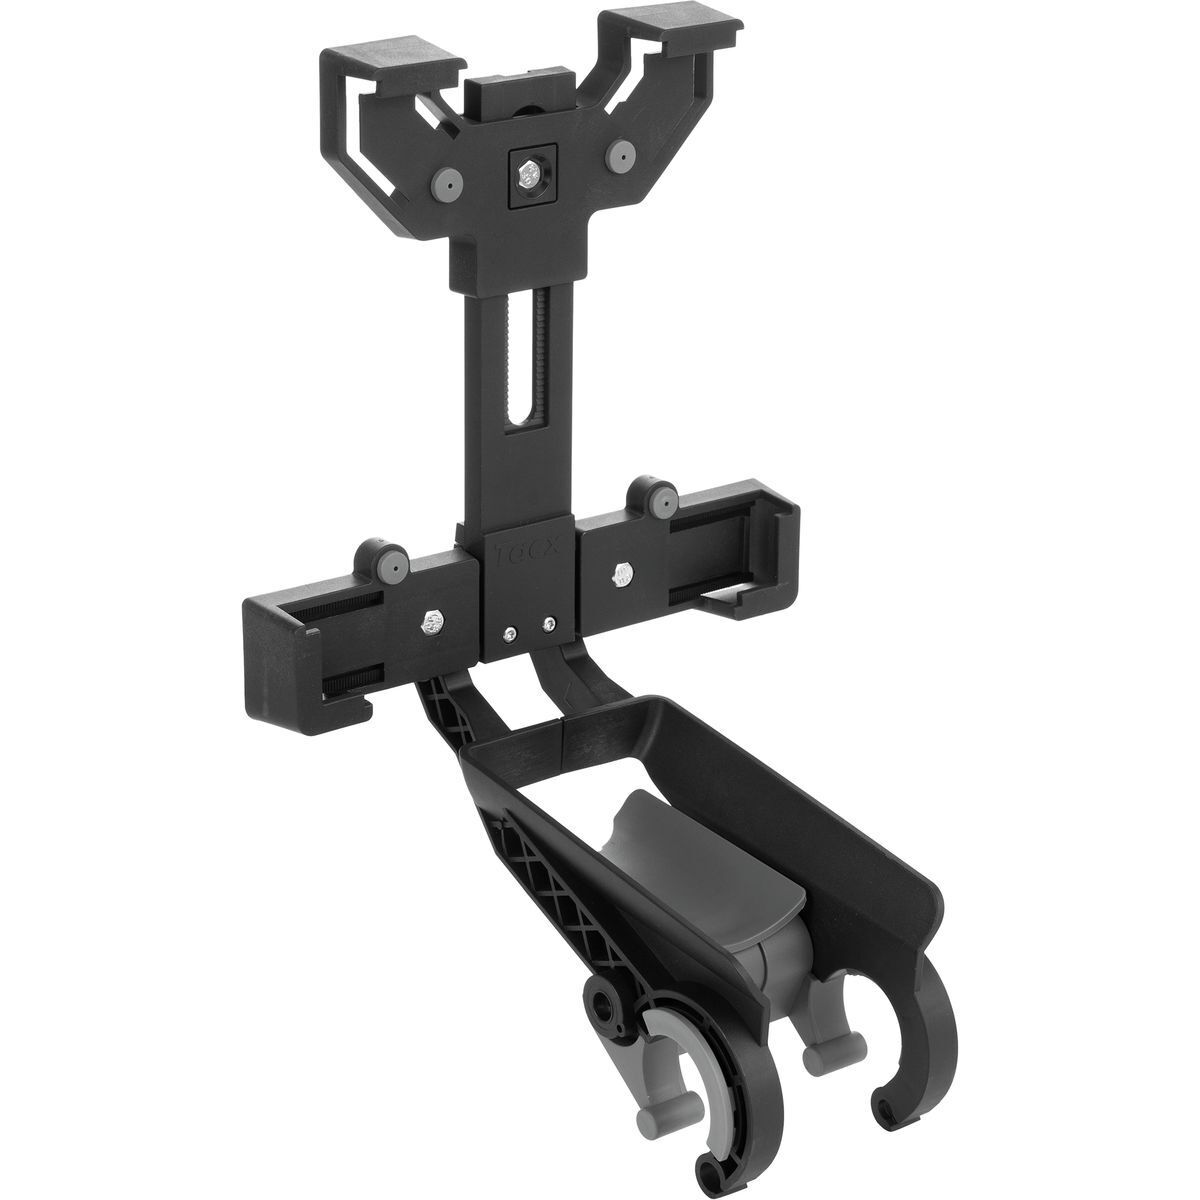 Garmin Tacx Handlebar Mount for Tablets One Color, One Size